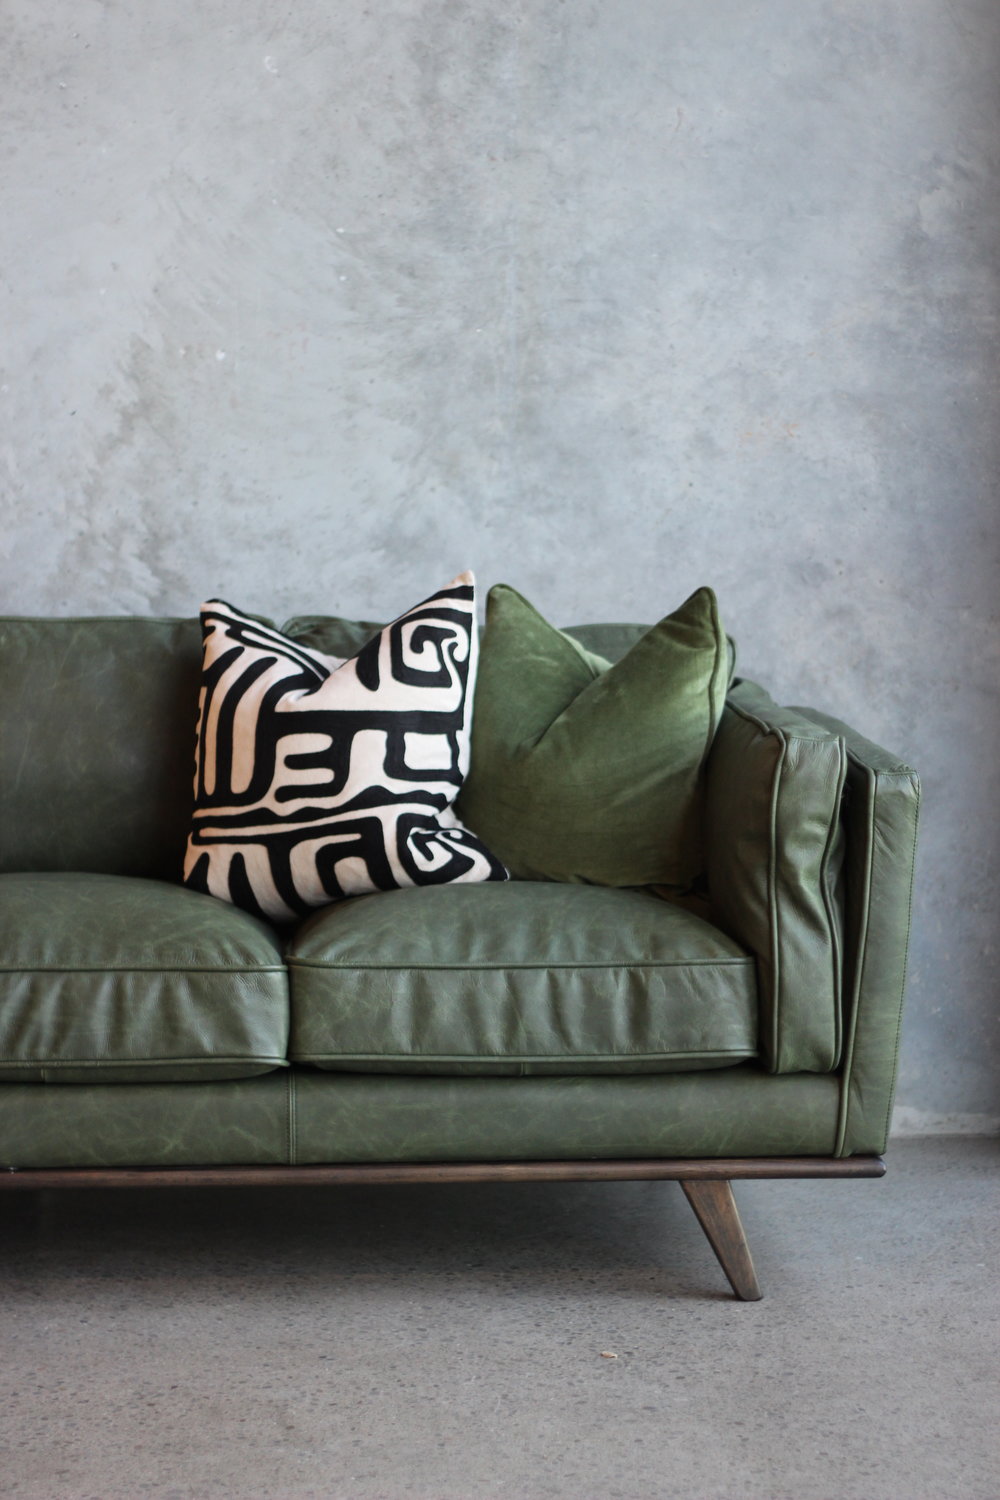 Del Rey Sofa Leather Pre Order, Green Leather Couches